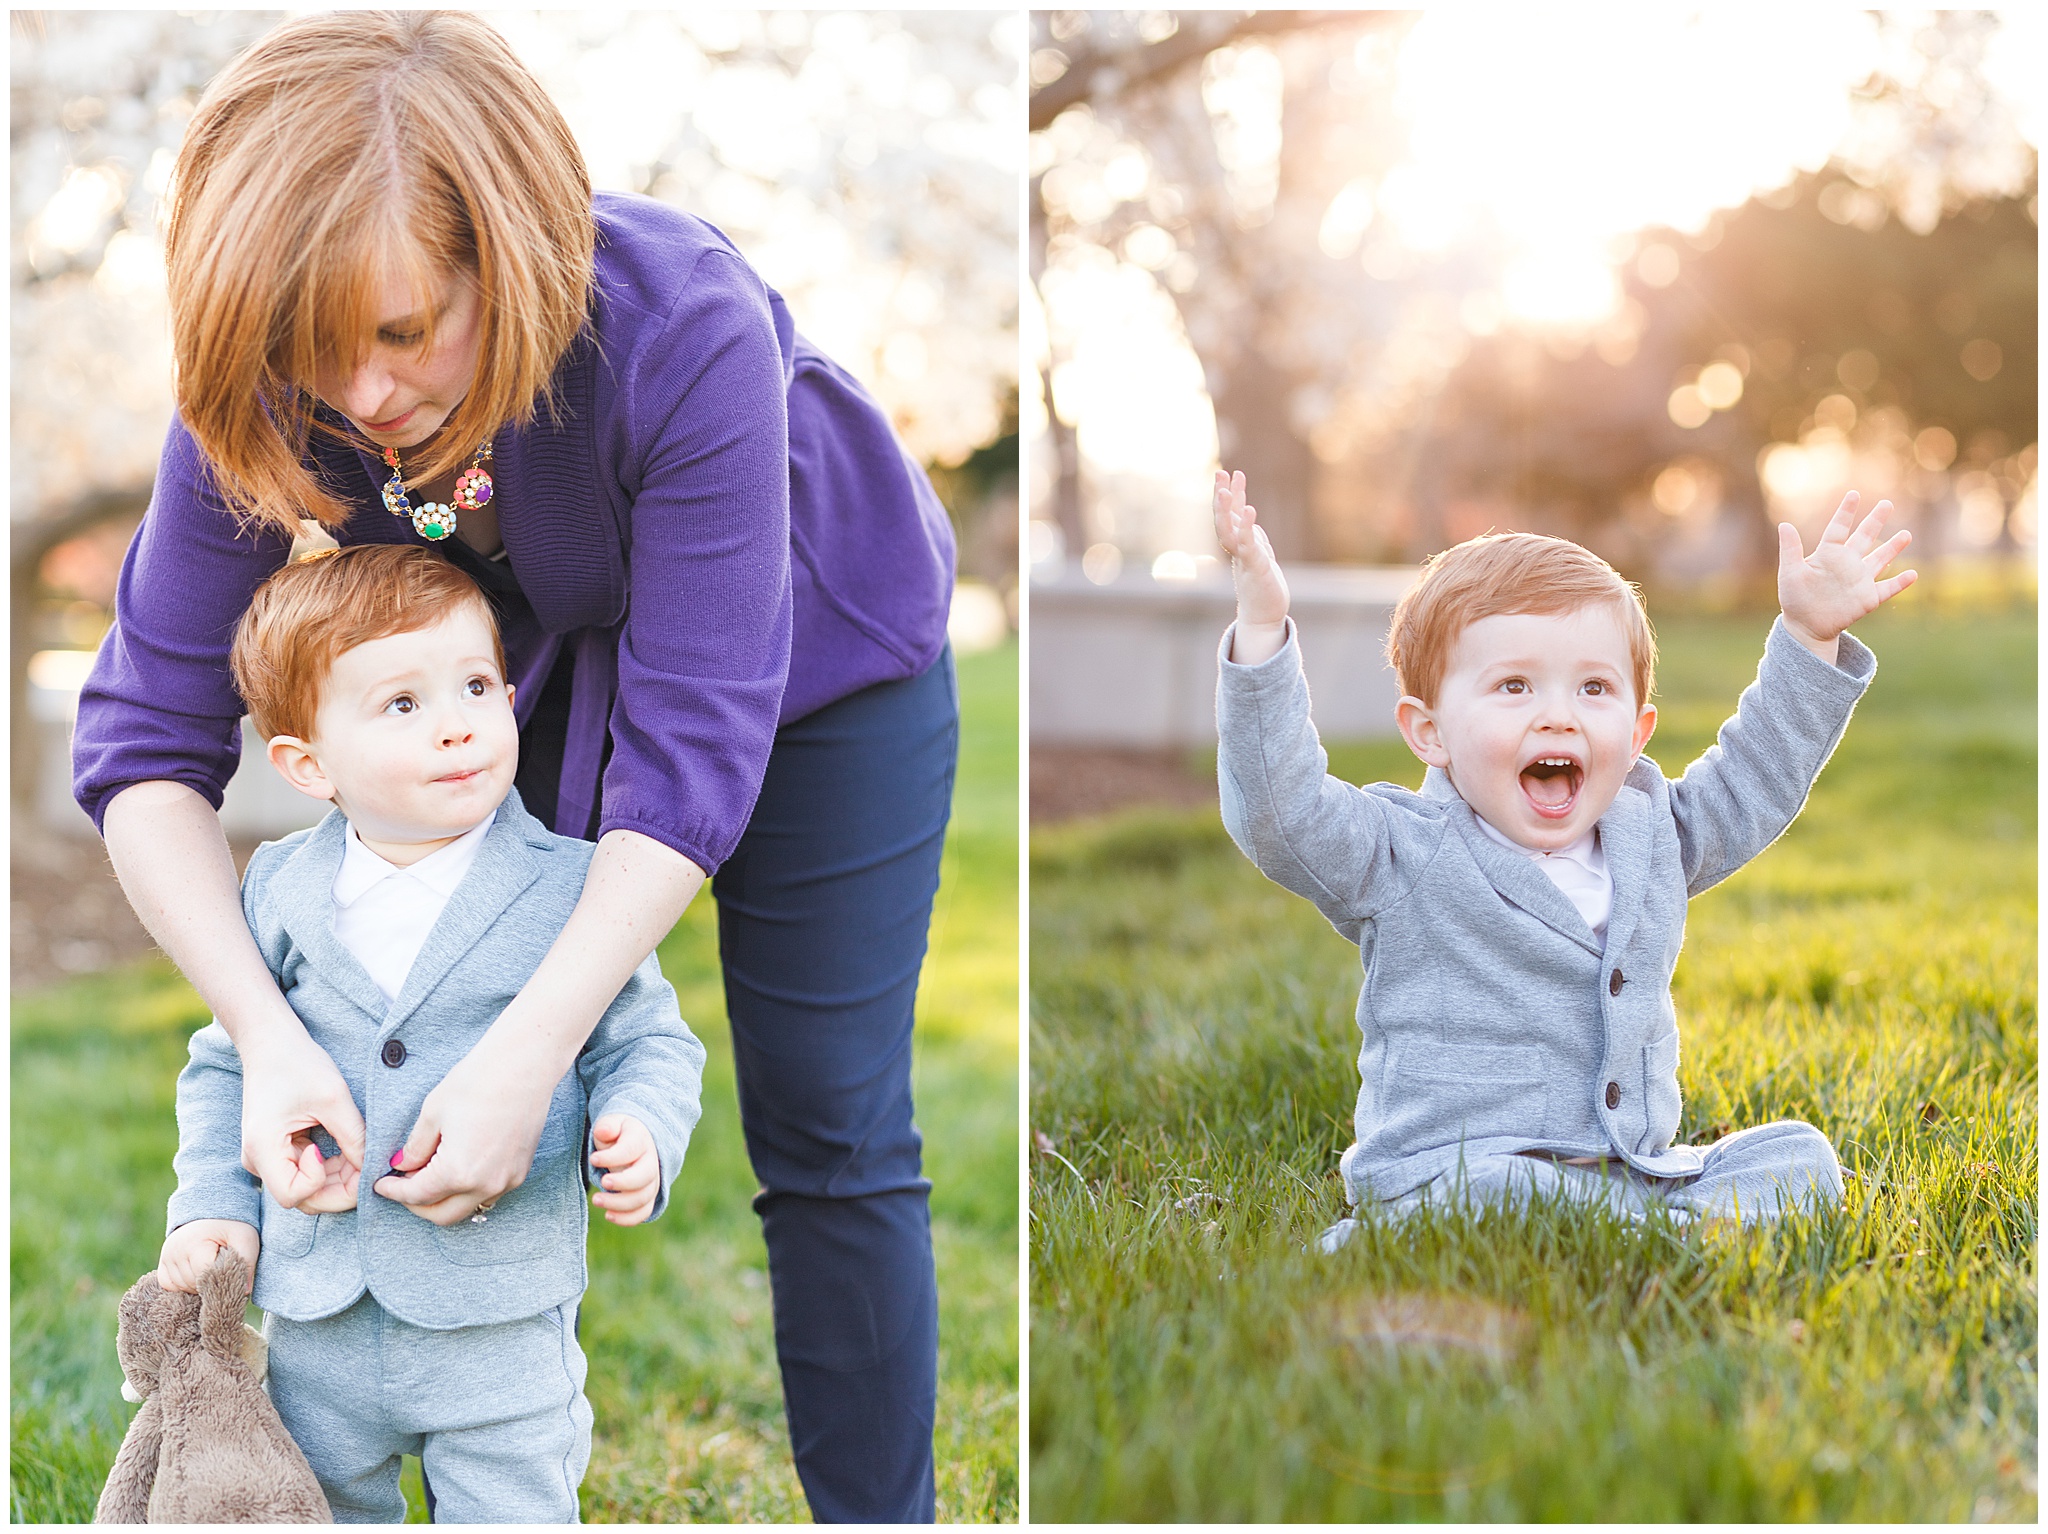 Mom and Son Portrait in D.C. Cherry Blossoms Session with Kofmehl Photography